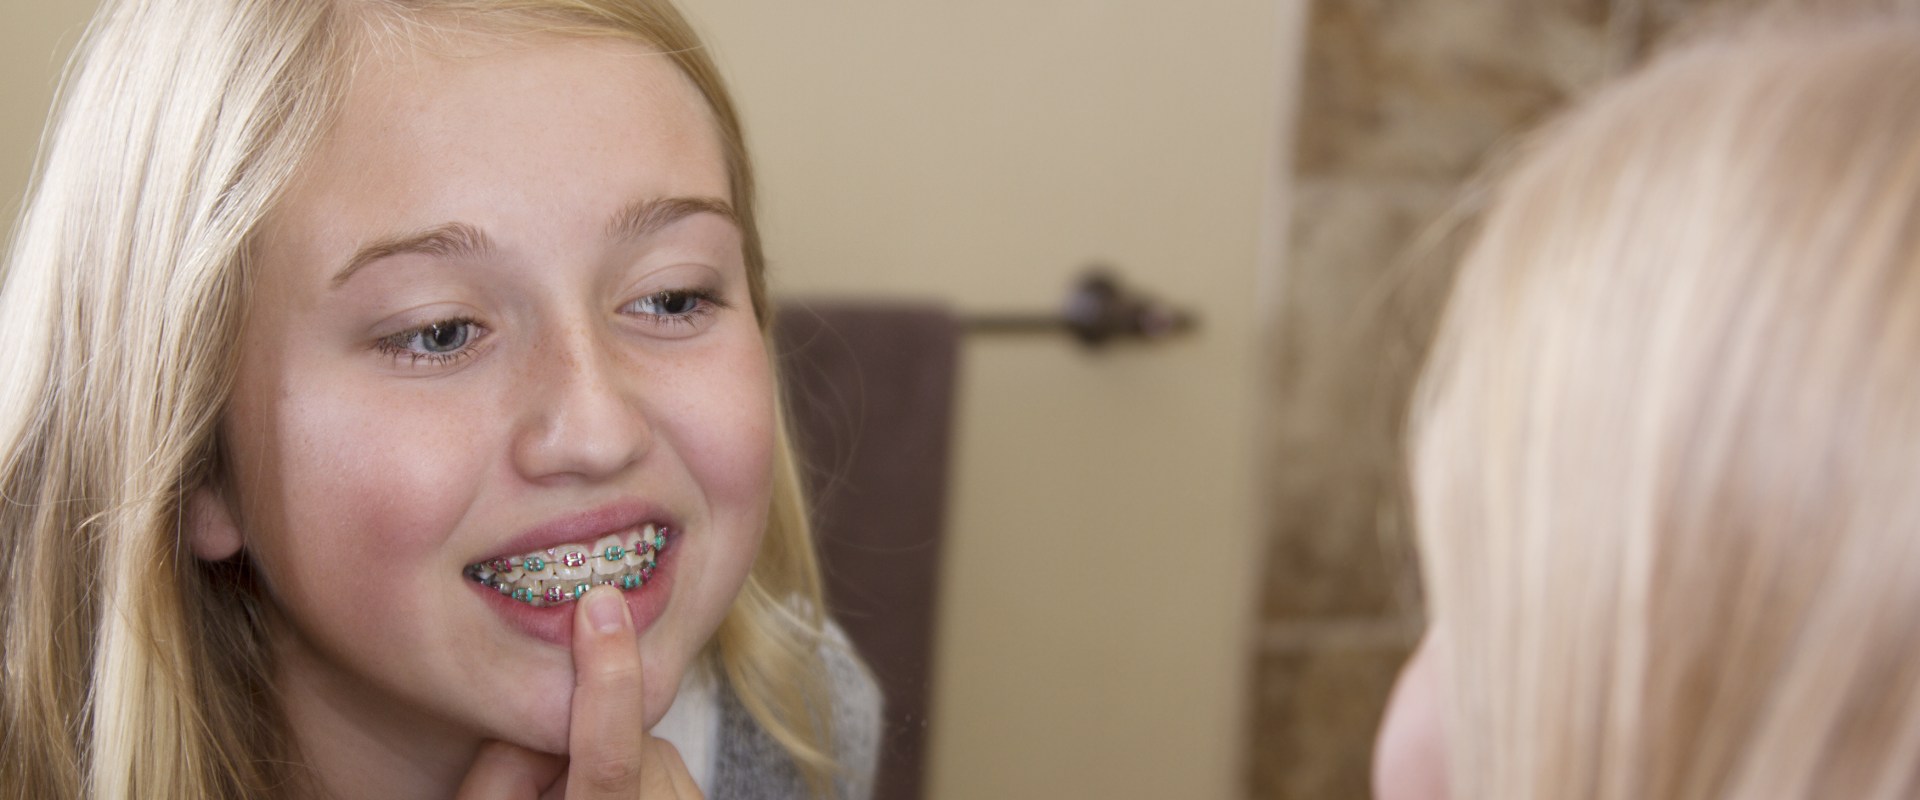 How Long is the Orthodontist Waiting List in the UK?